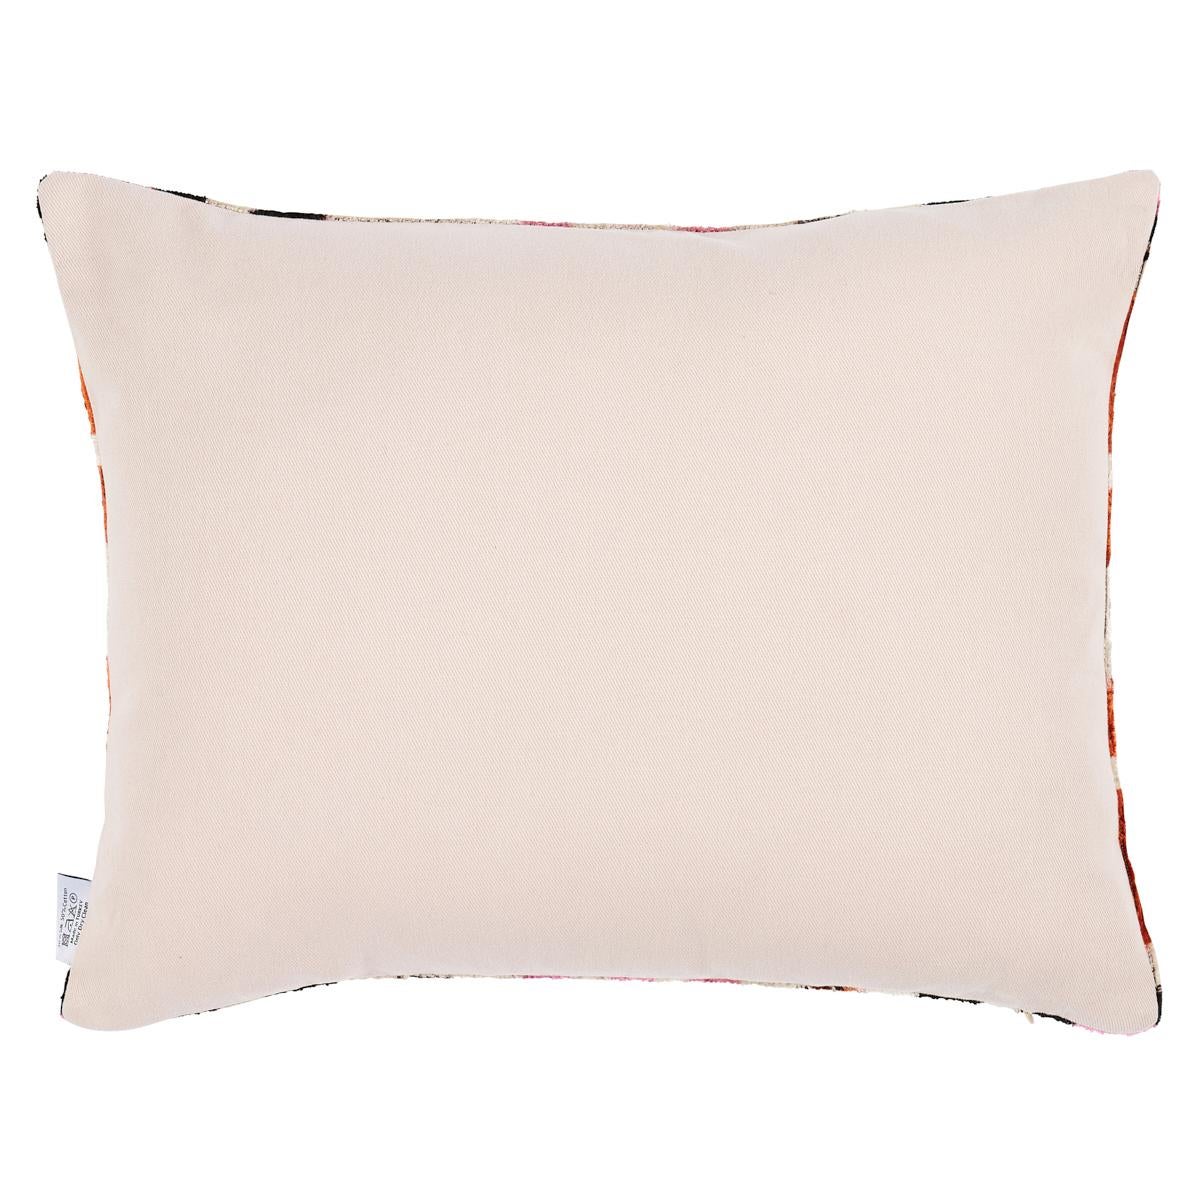 The Adana Silk Velvet Pillow by Les Ottomans features handwoven fabric with a knife edge finish. Les Ottomans pillows are handmade in Istanbul, juxtaposing the traditional patterns of Turkey with a wide range of contemporary colors, designs and